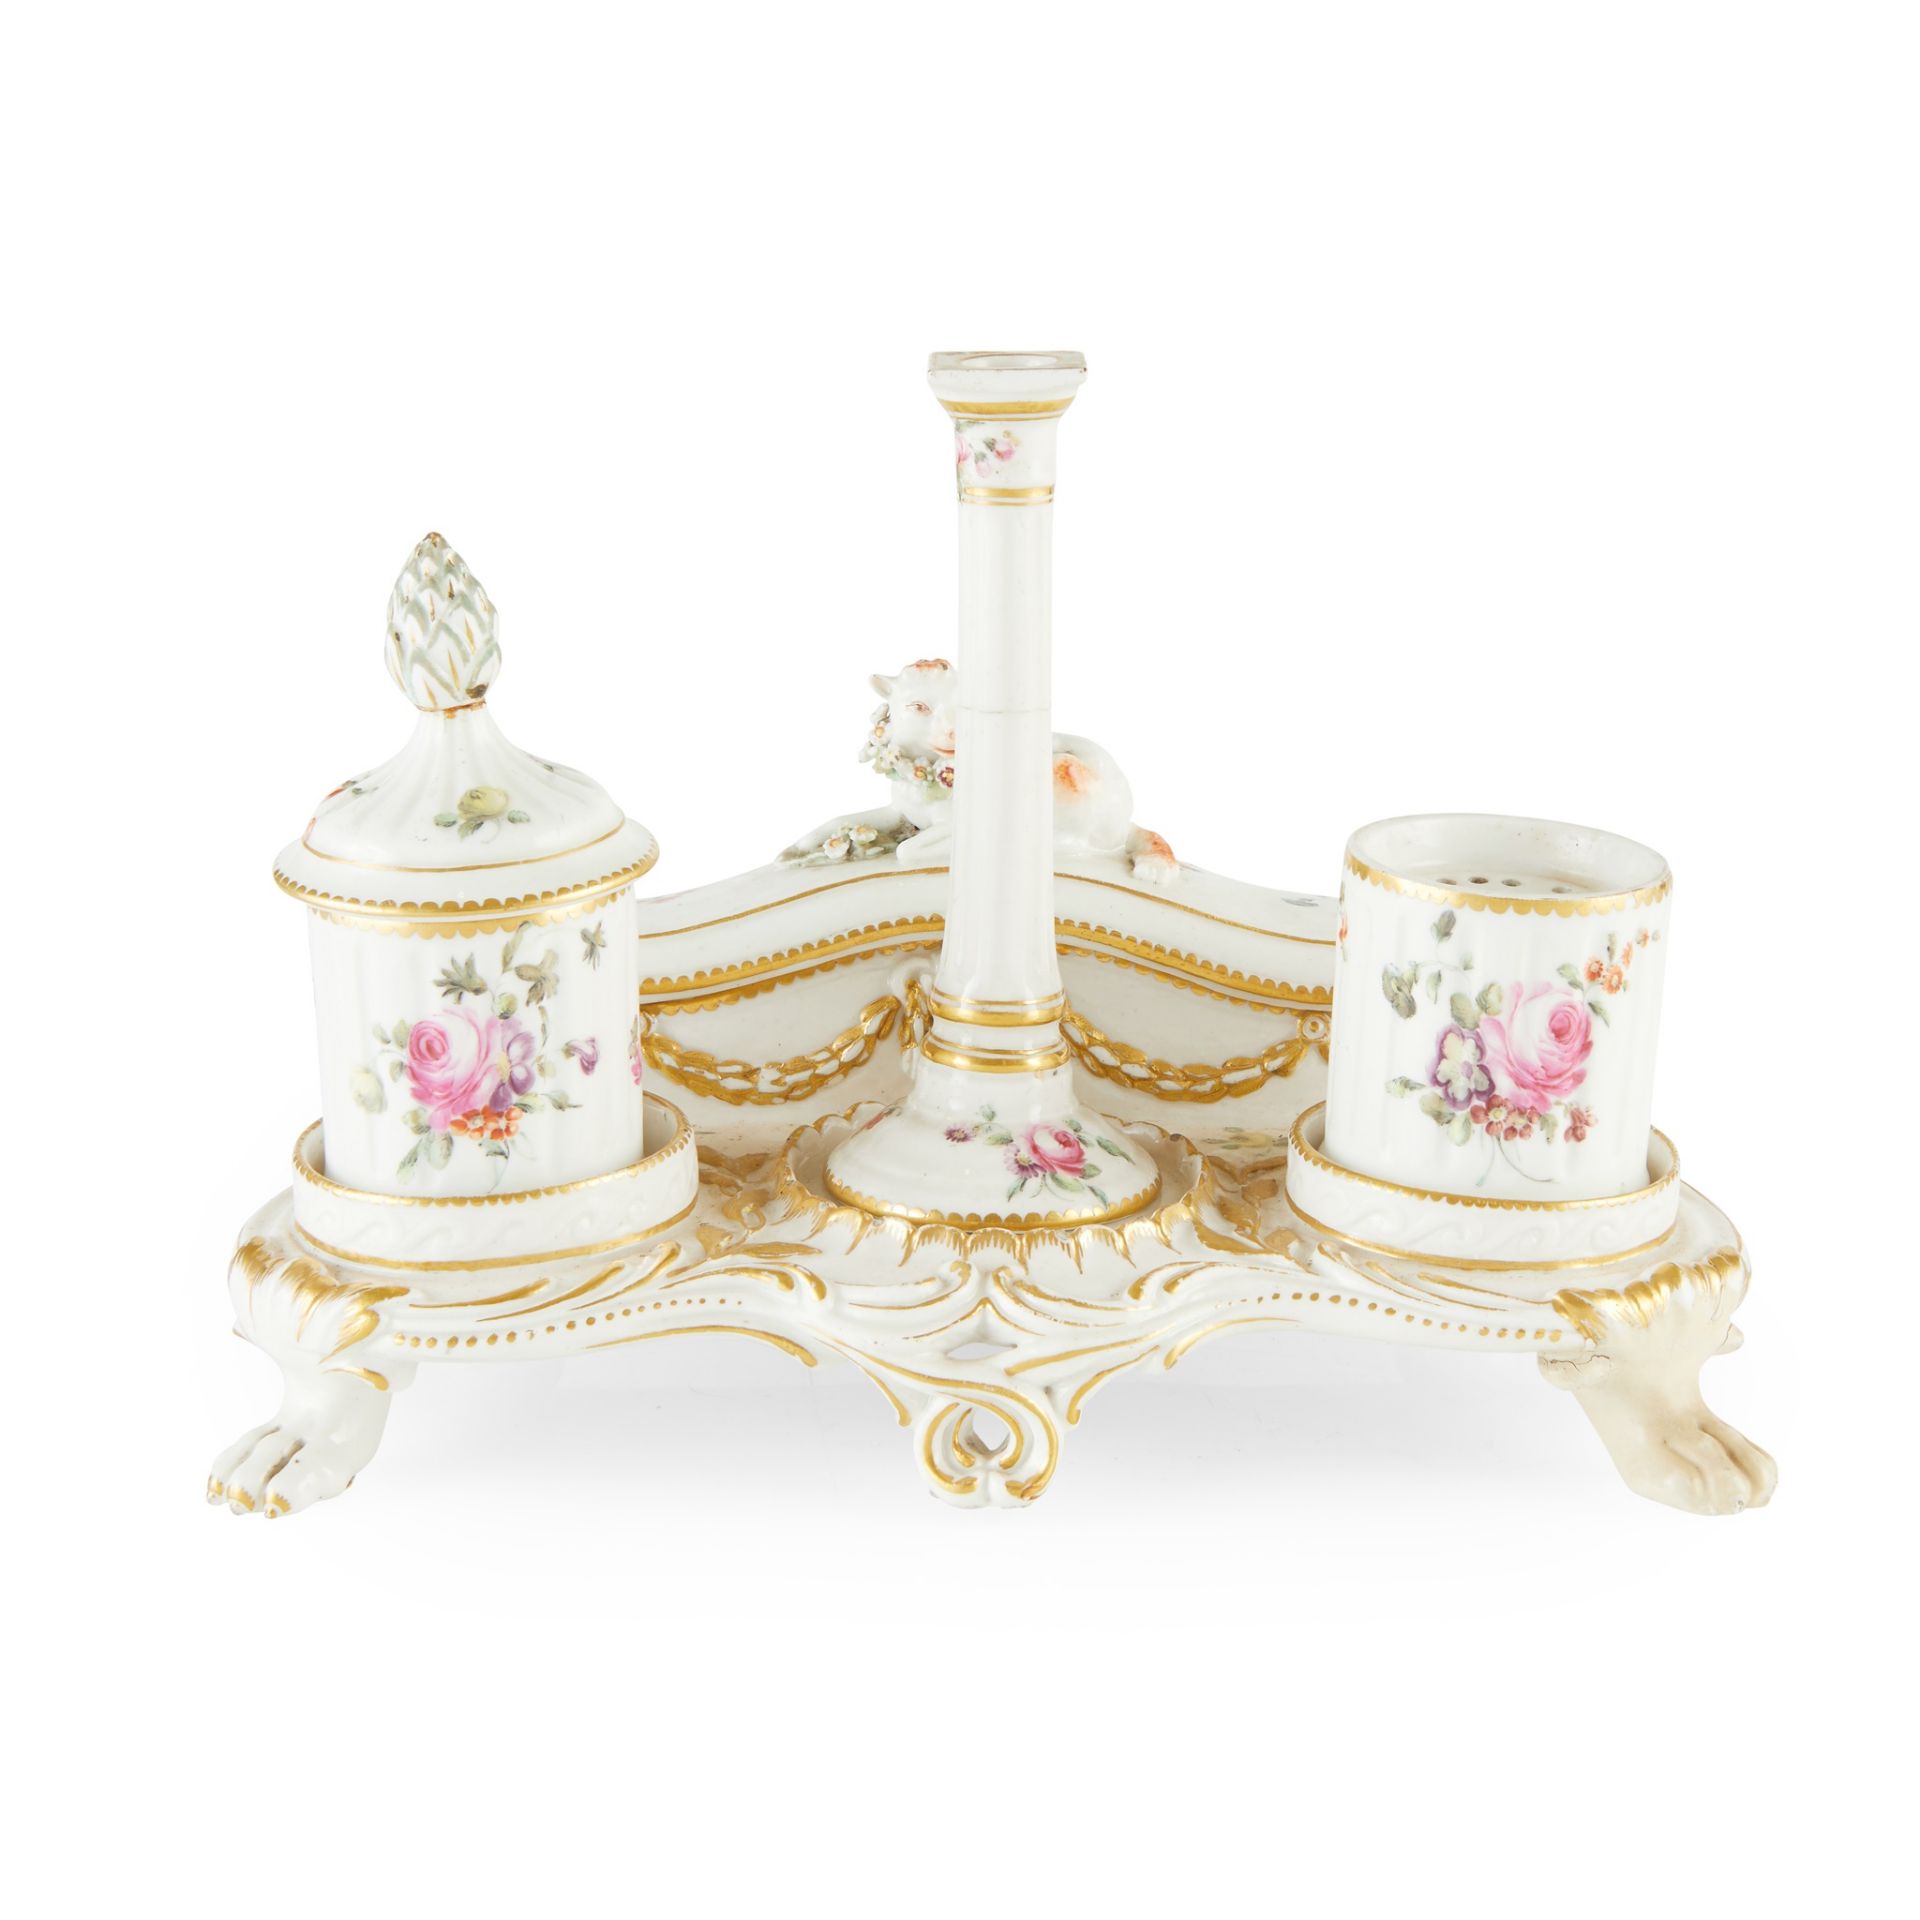 CHELSEA DERBY PORCELAIN INKSTAND LATE 18TH CENTURY - Image 2 of 2